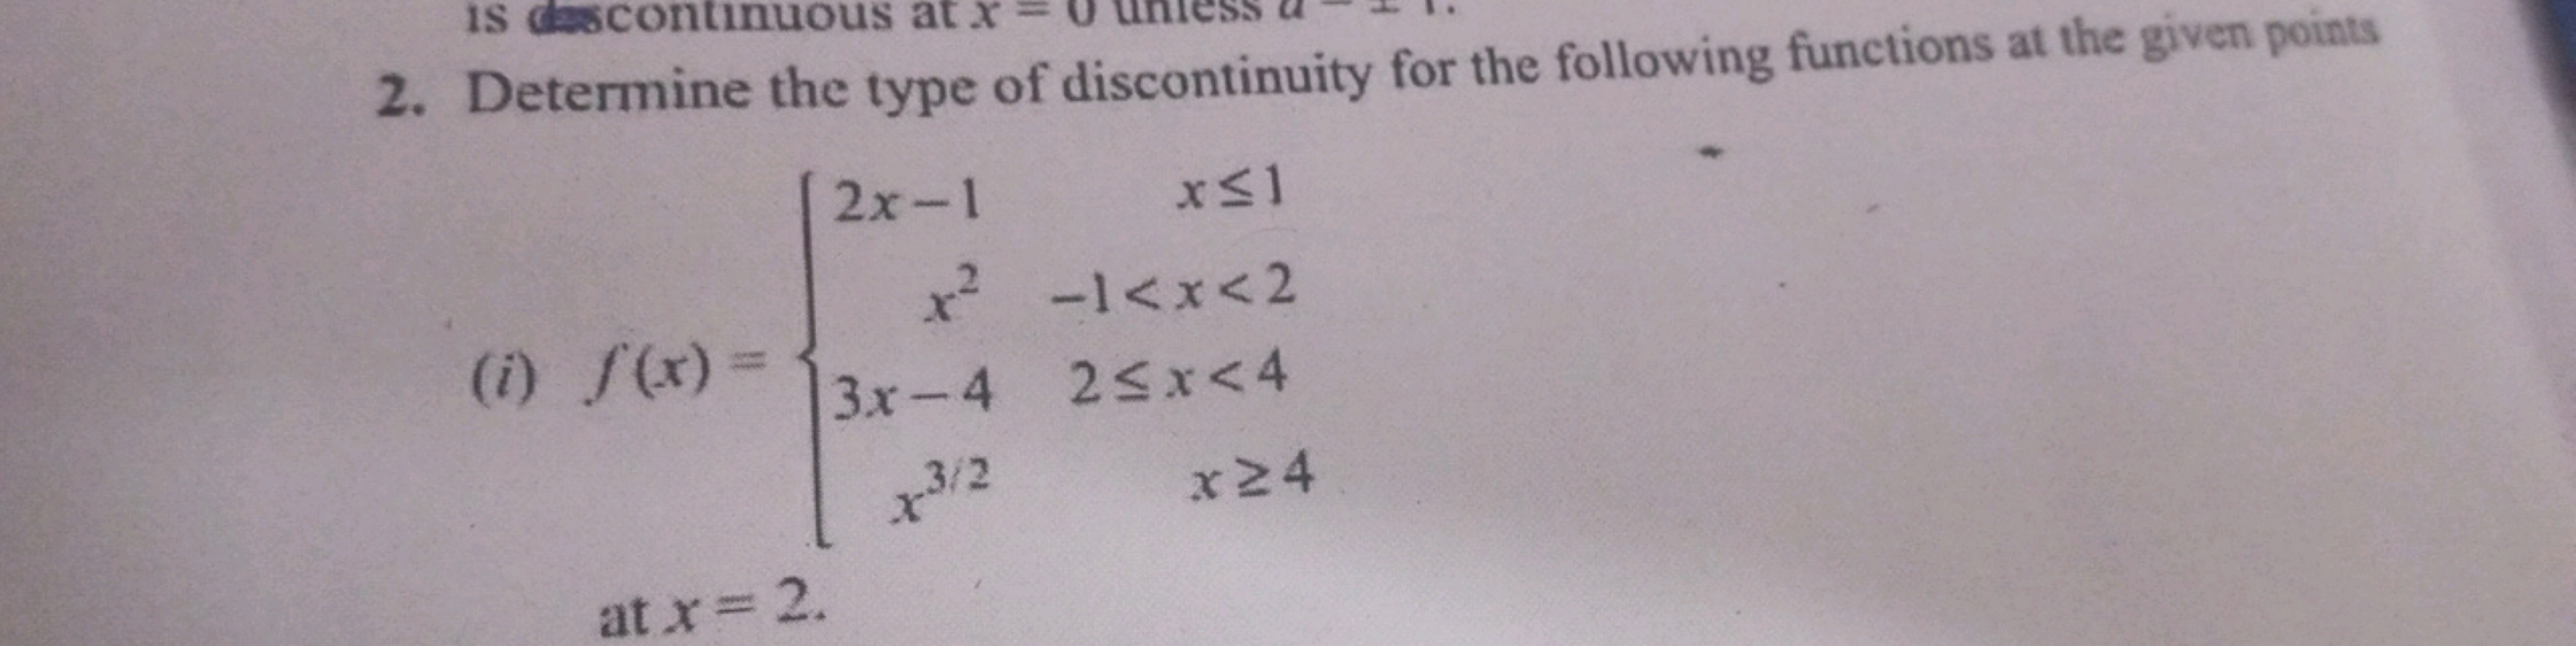 2. Determine the type of discontinuity for the following functions at 